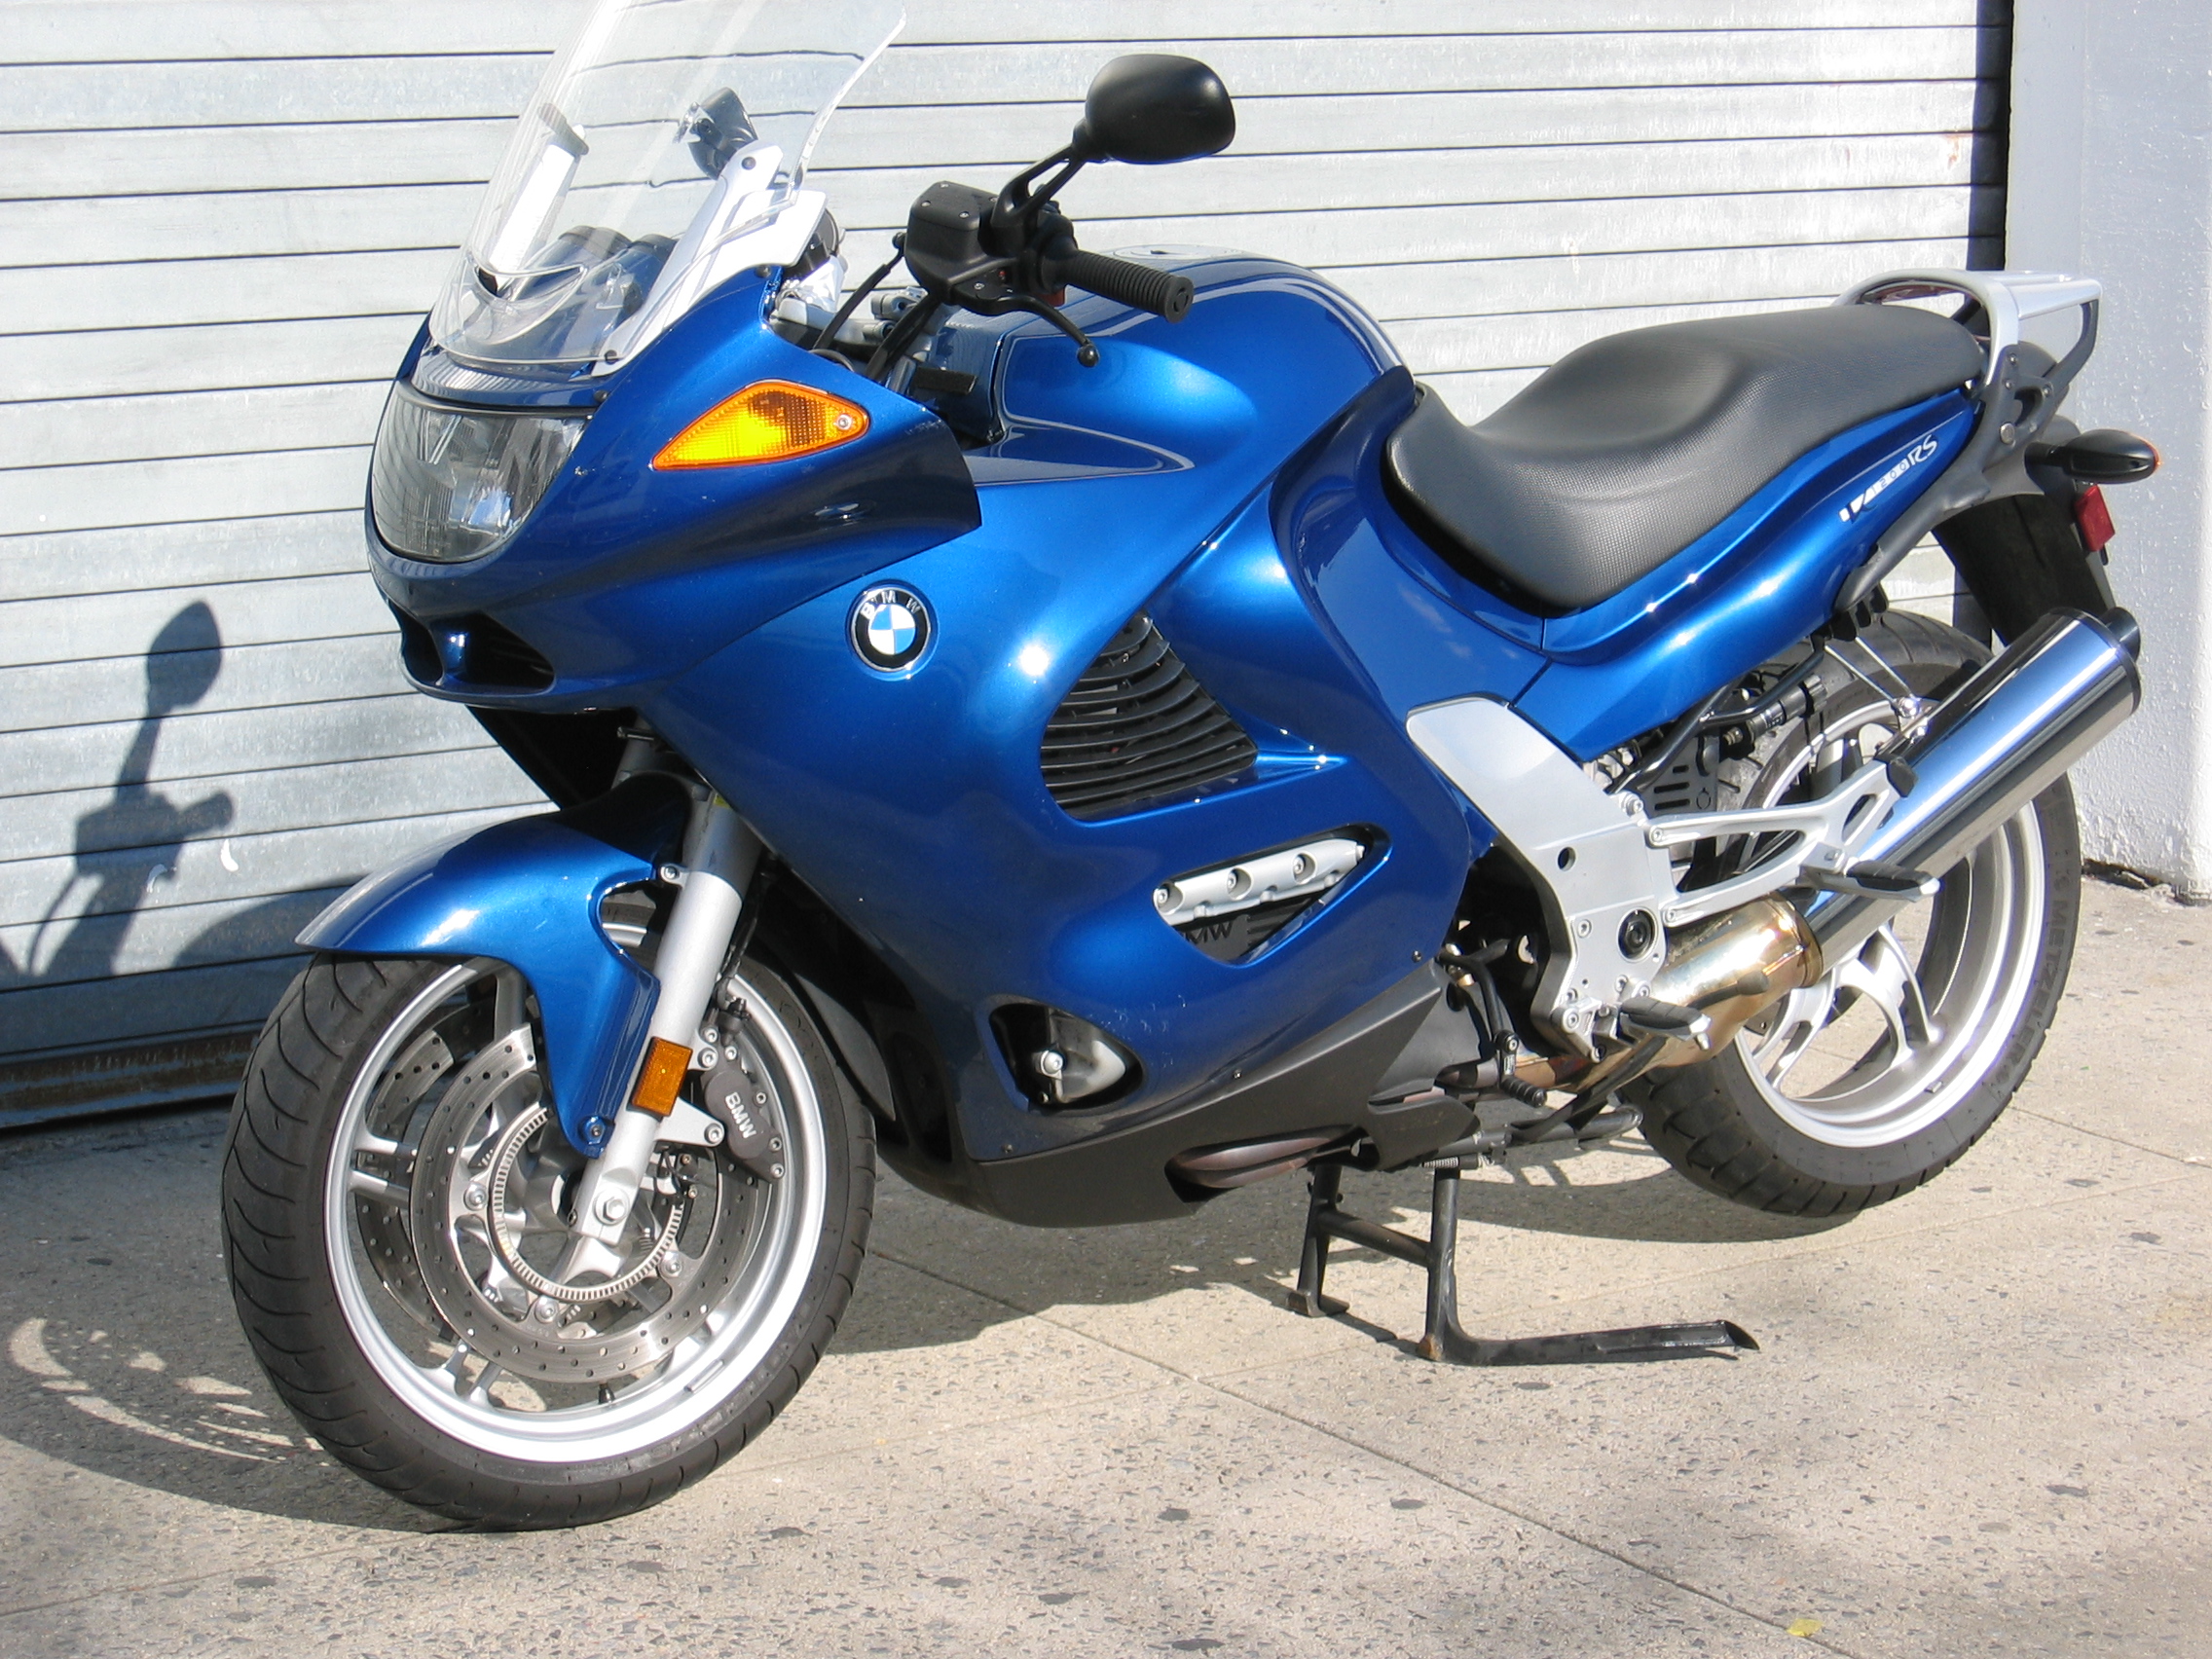 Specs on bmw k1200rs #1